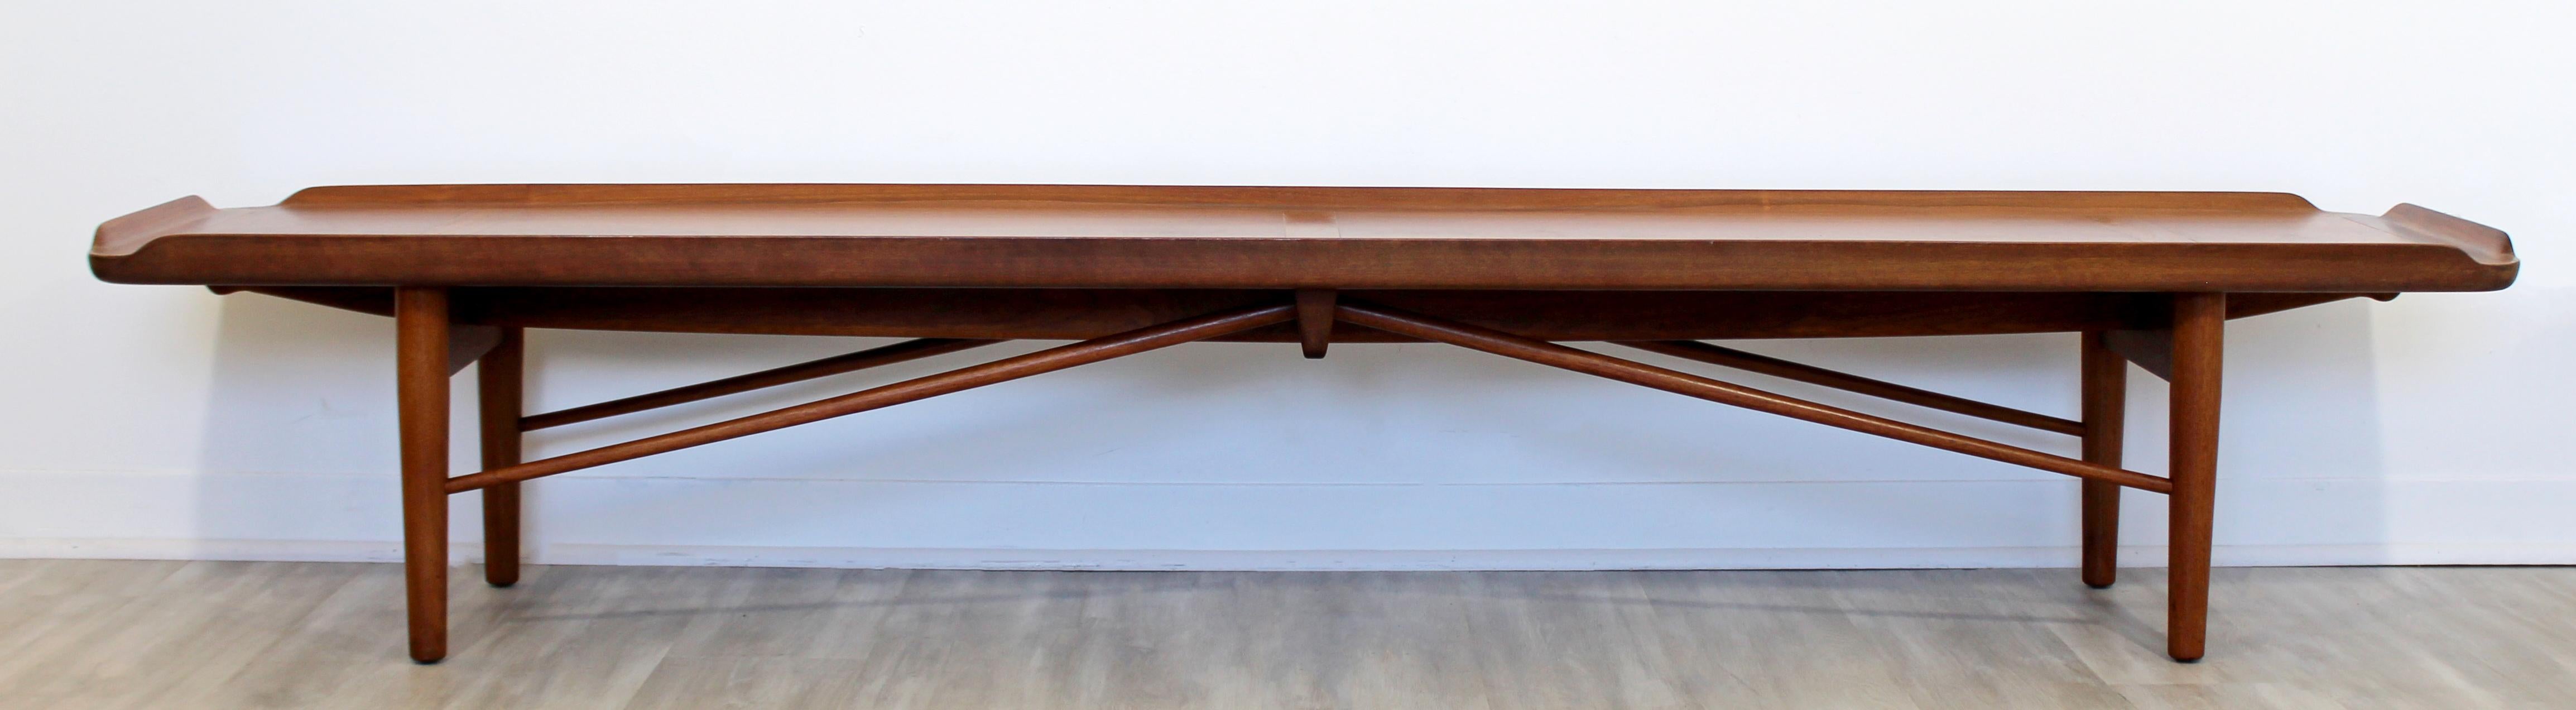 For your consideration is a luxuriously long bench seat or coffee table, made of walnut wood, by Finn Juhl for Baker Furniture, circa 1950s. In excellent vintage condition. The dimensions are 88